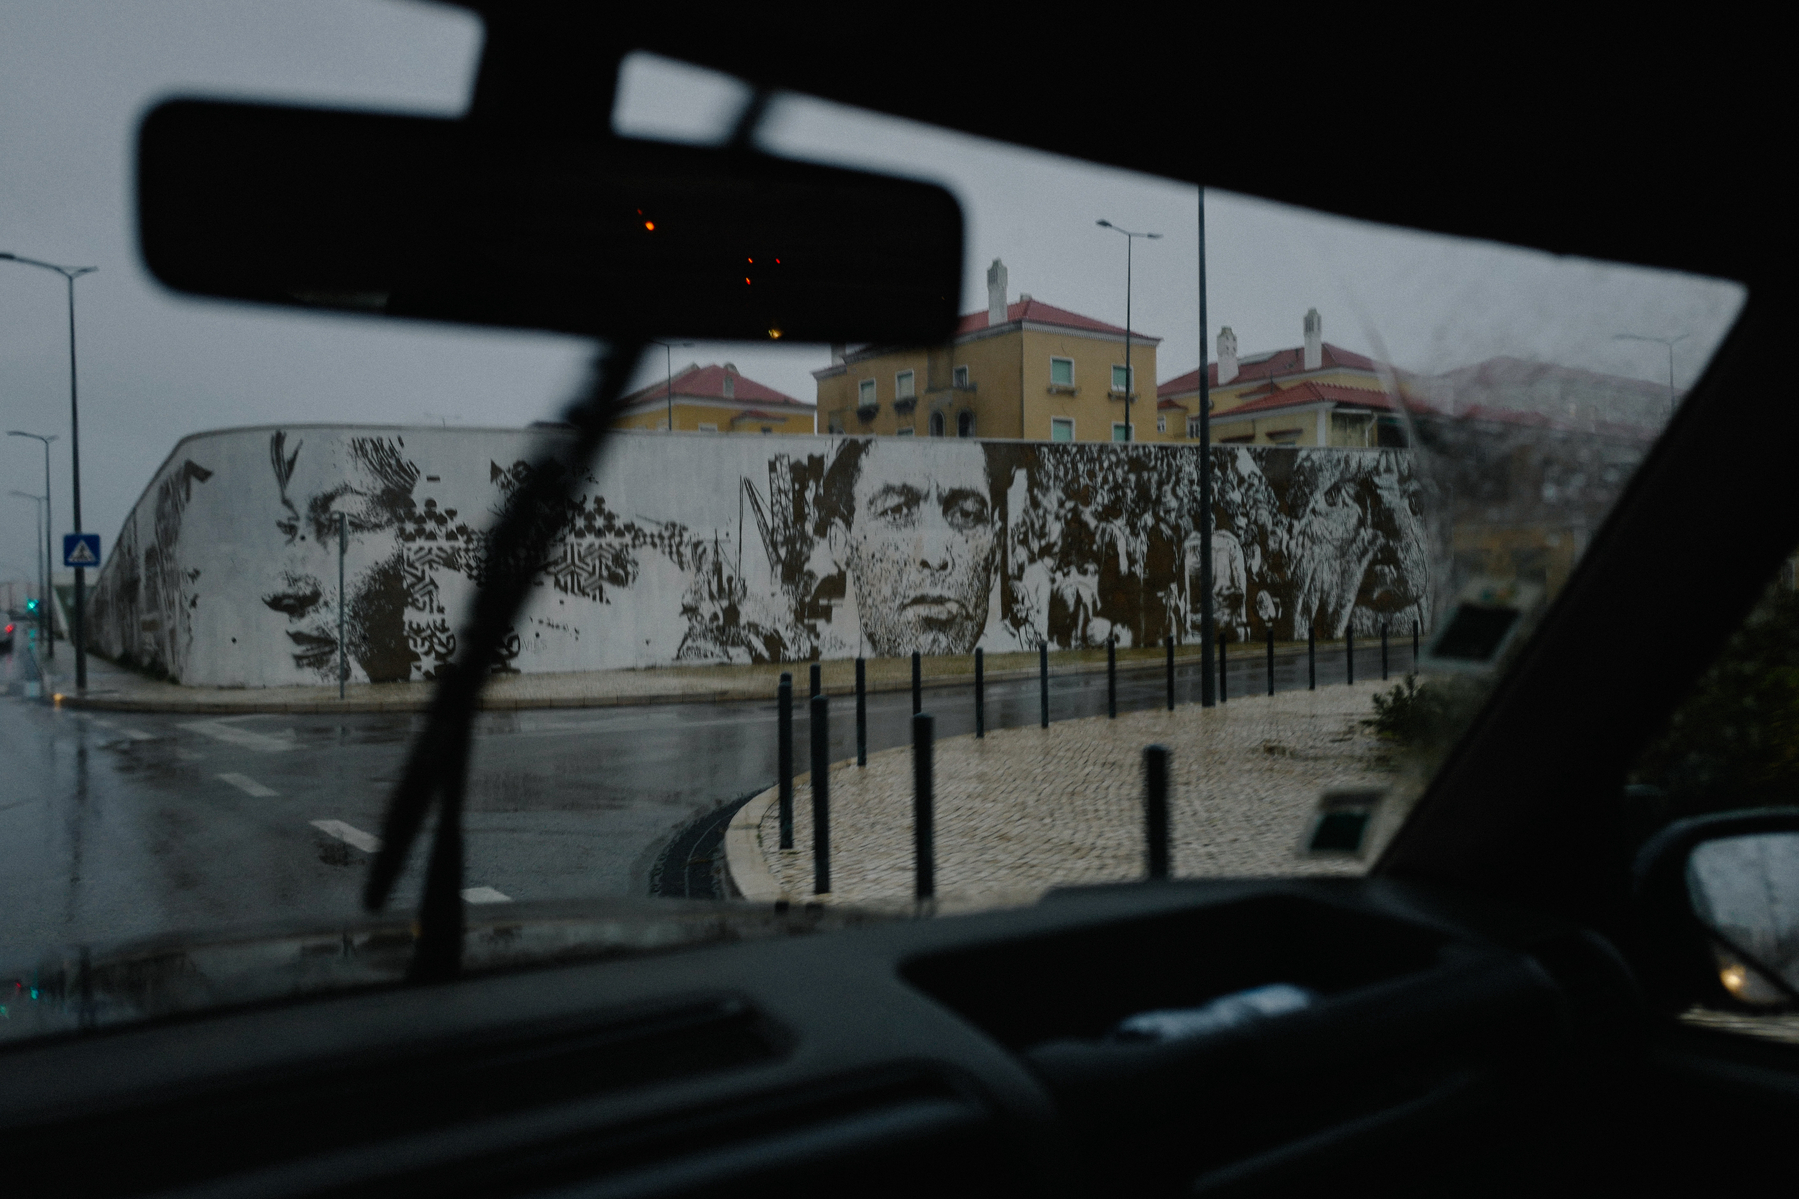 A view from inside a vehicle showing a windshield wiper and rearview mirror, with a street scene outside including a large mural on a curved wall, featuring stylized black and white faces and figures. The weather appears rainy.